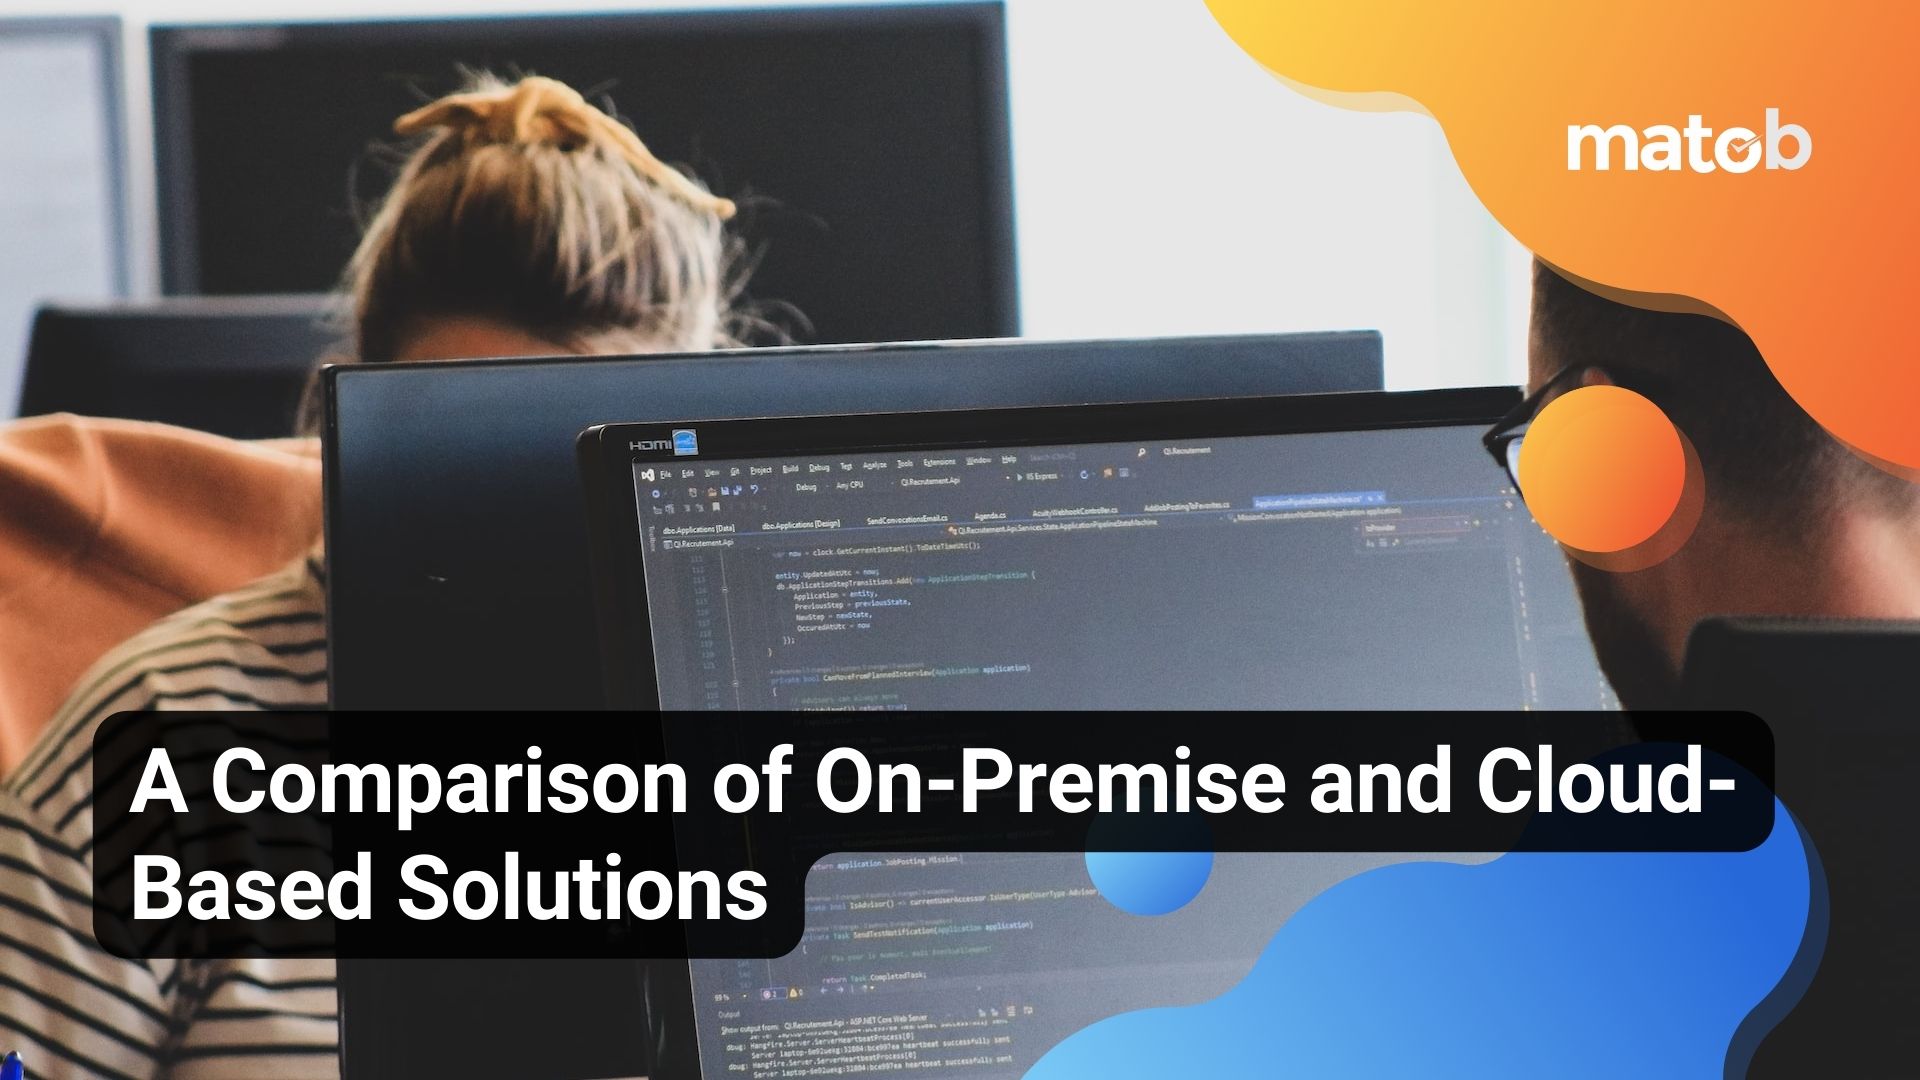 A Comparison of On-Premise and Cloud-Based Solutions